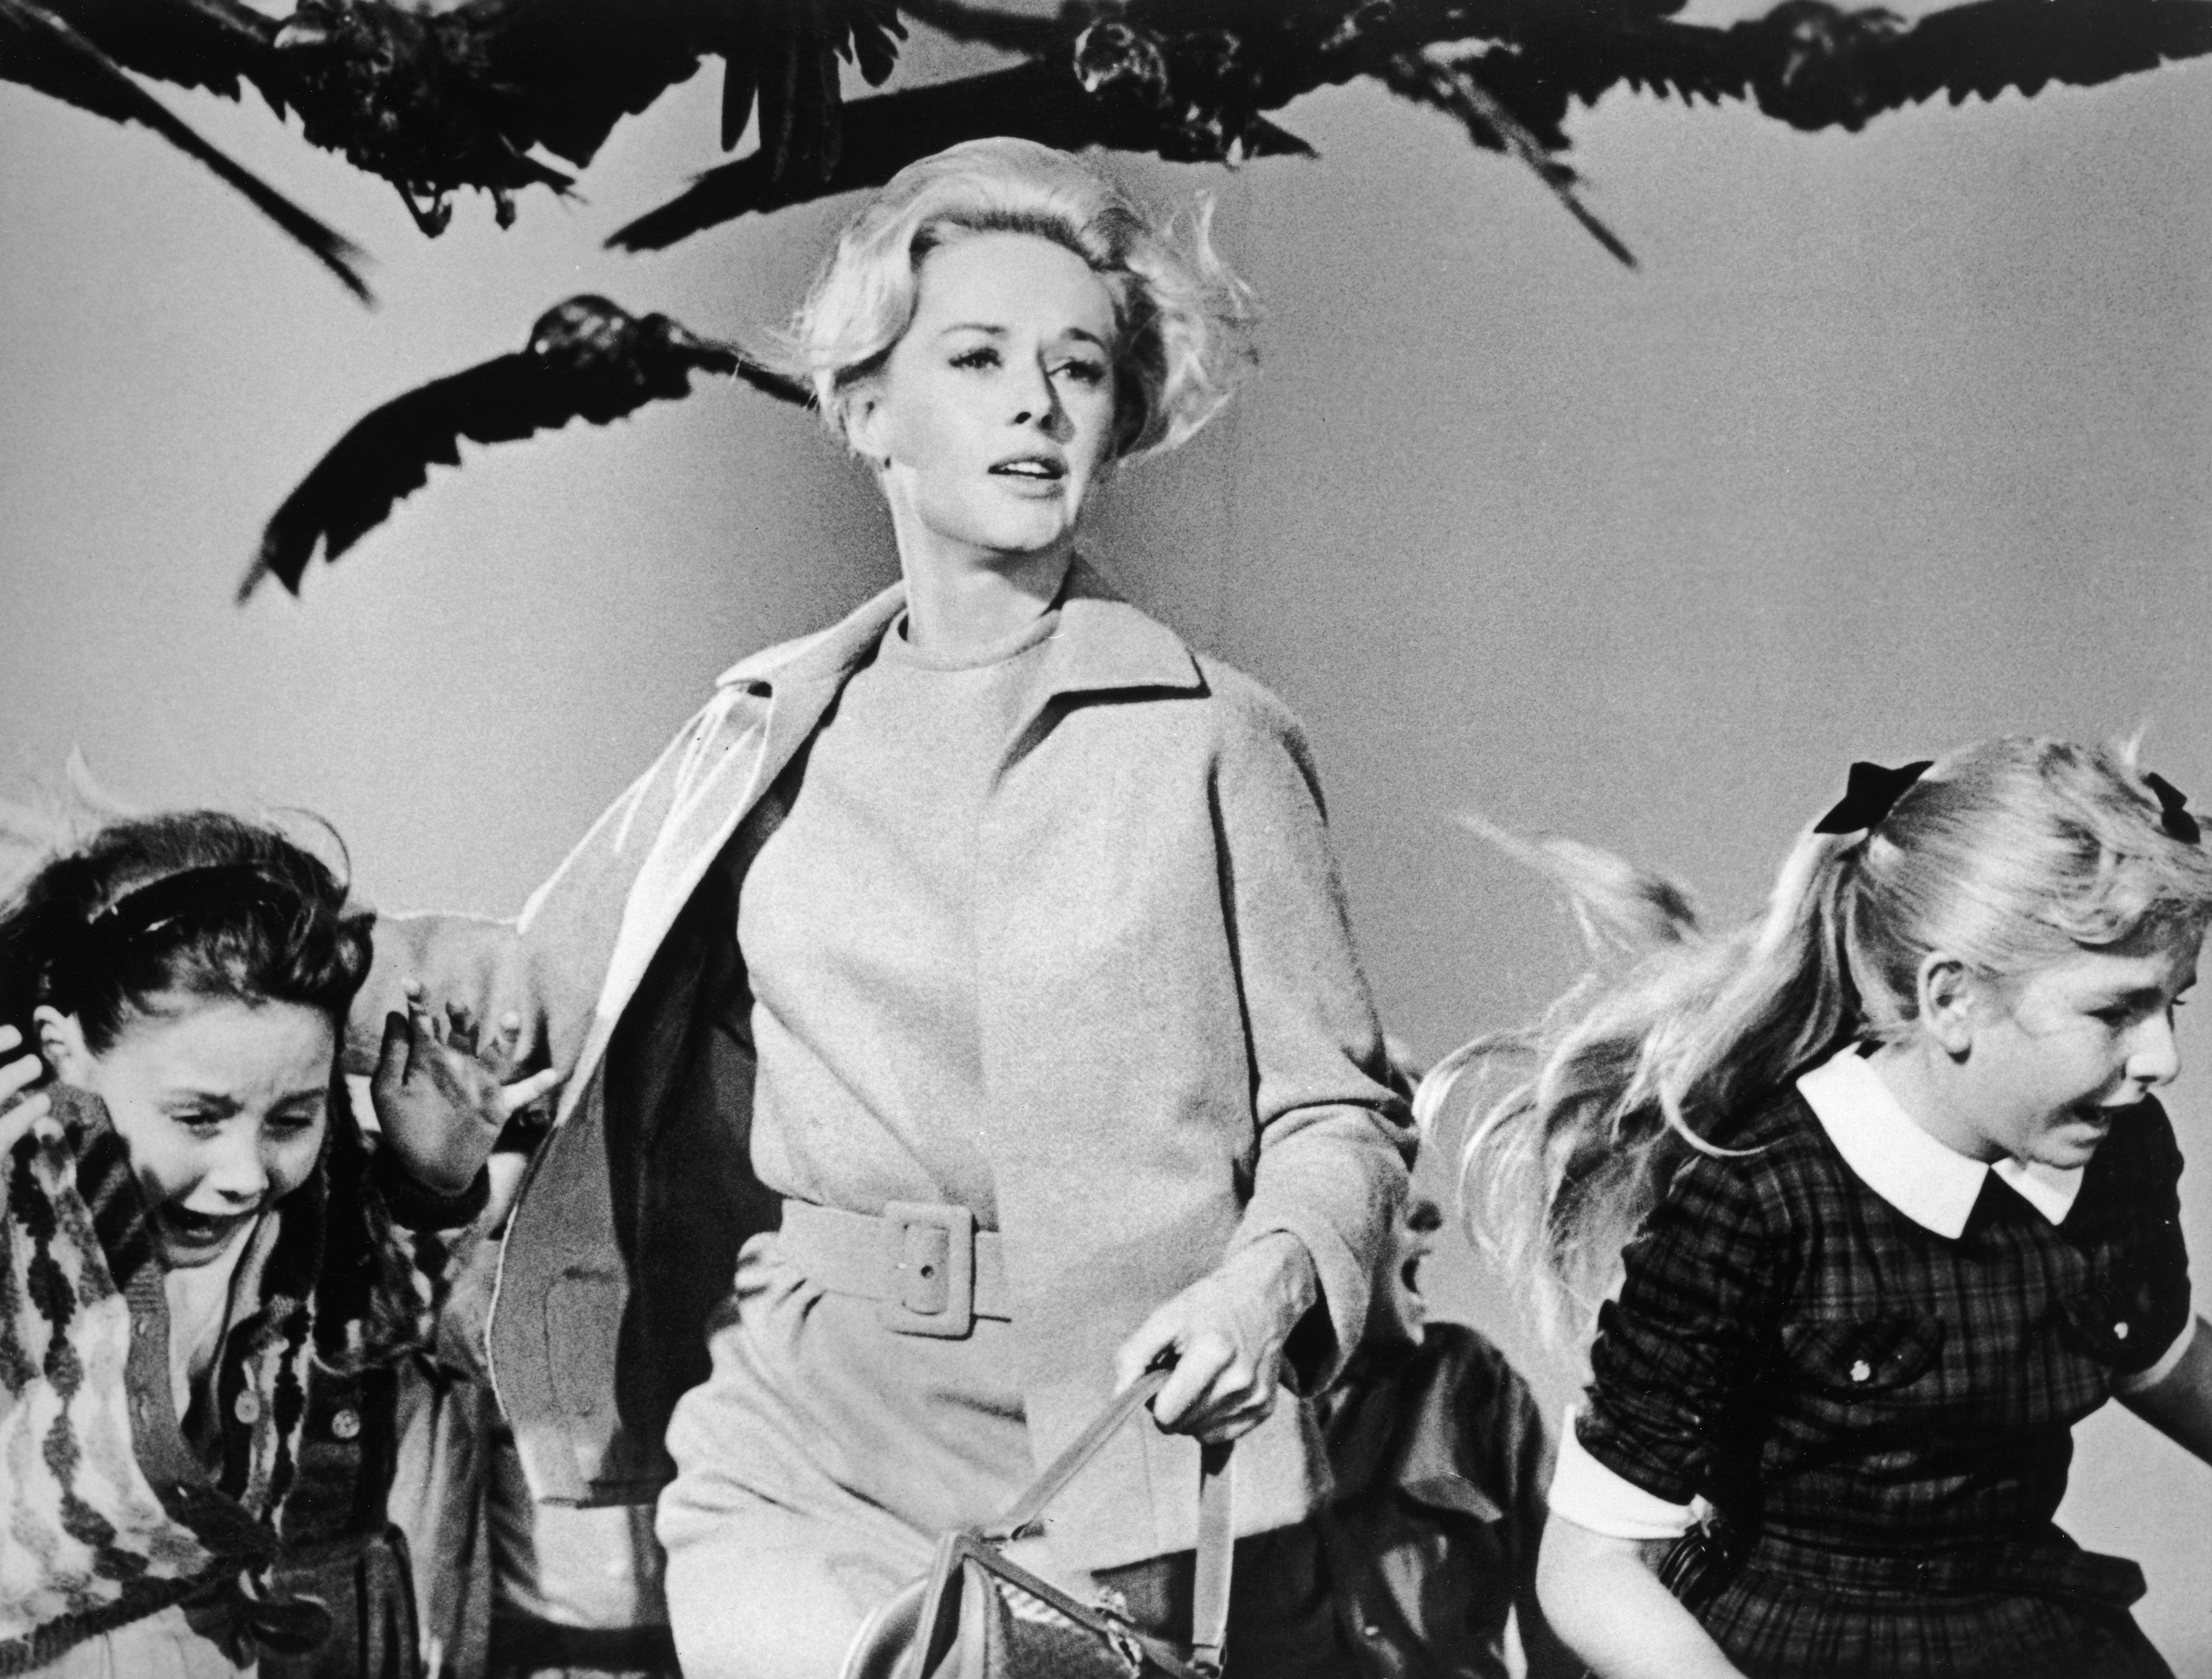 American actor Tippi Hedren and a group of children run away from the attacking crows in a still from the film &#x27;The Birds&#x27;